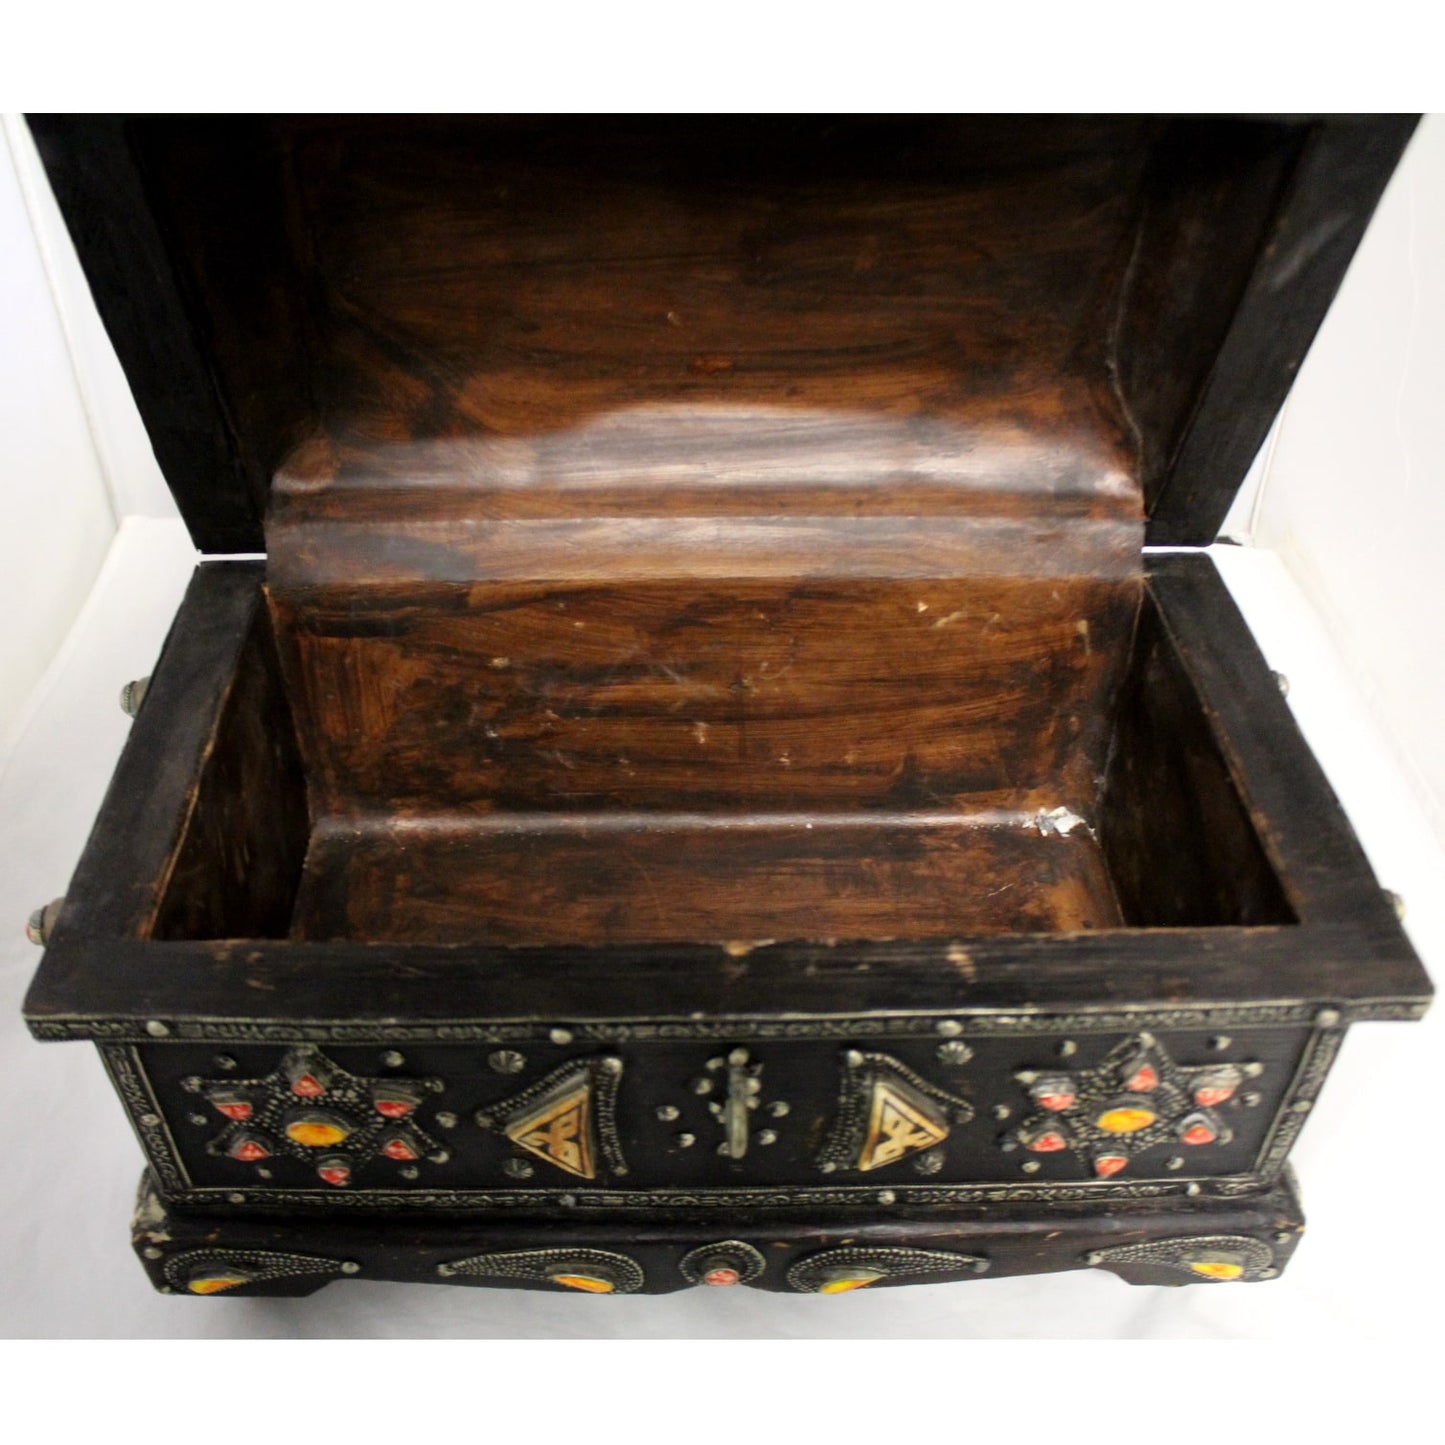 Moroccan Chest